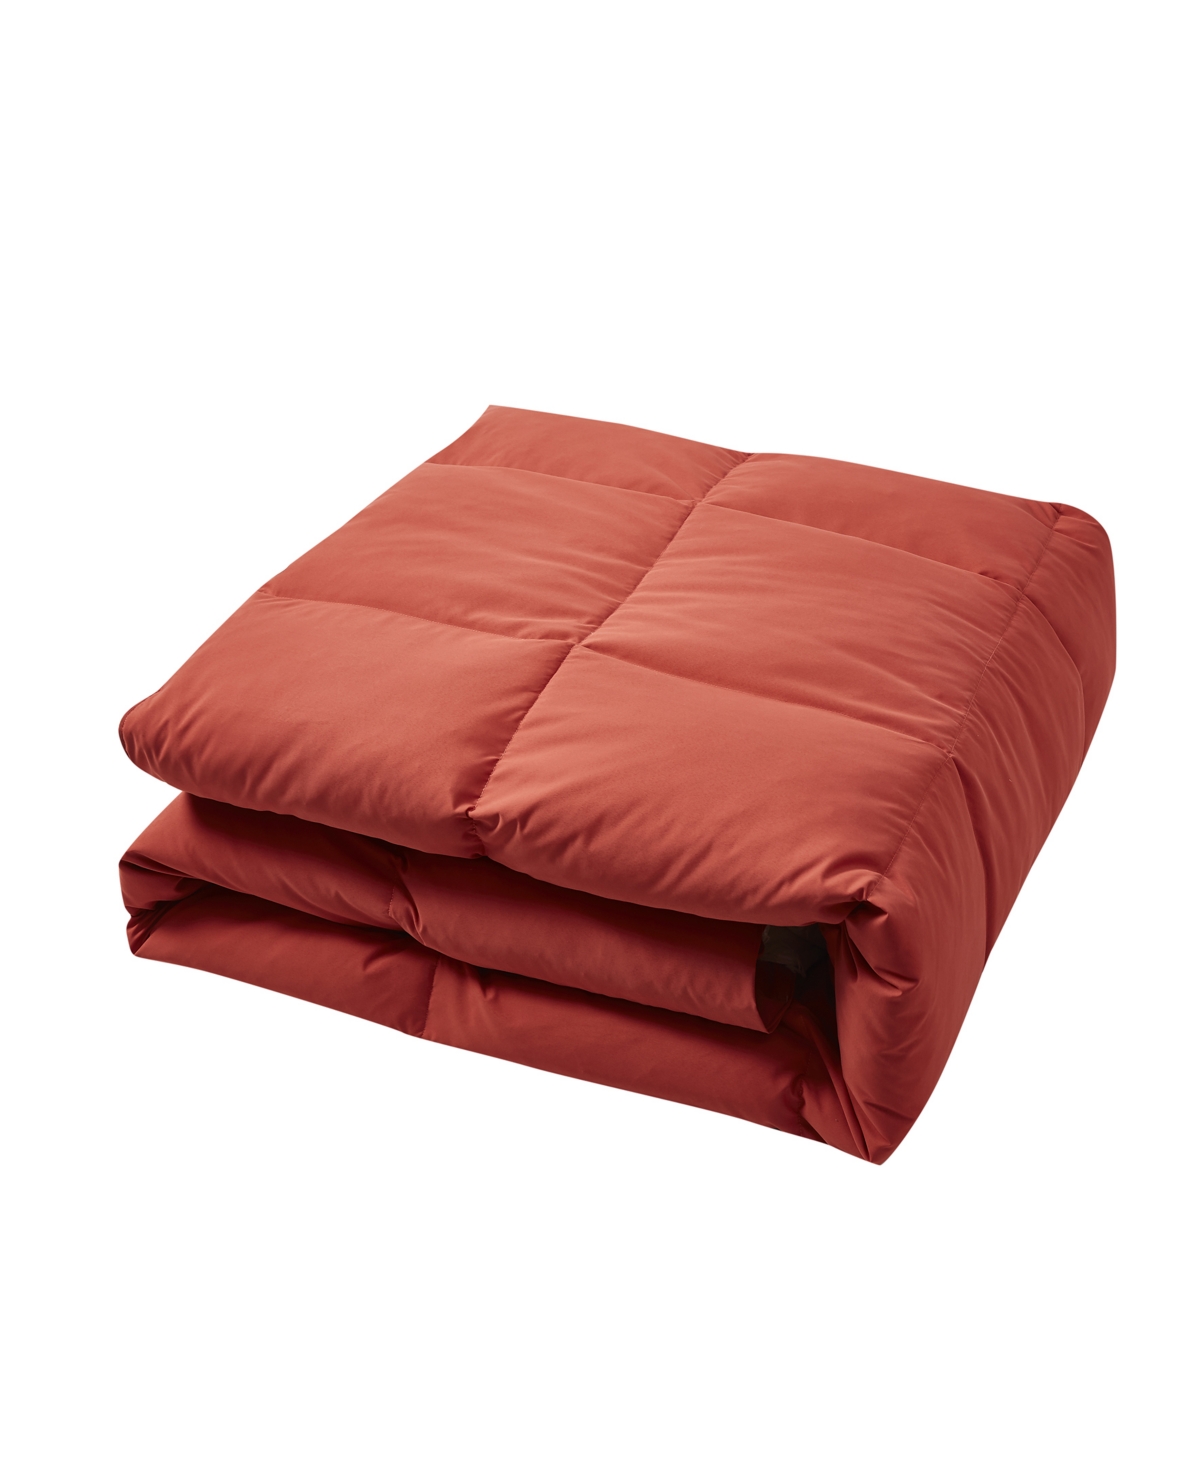 Beautyrest Microfiber Colored Feather & Down Comforter, Twin In Brick